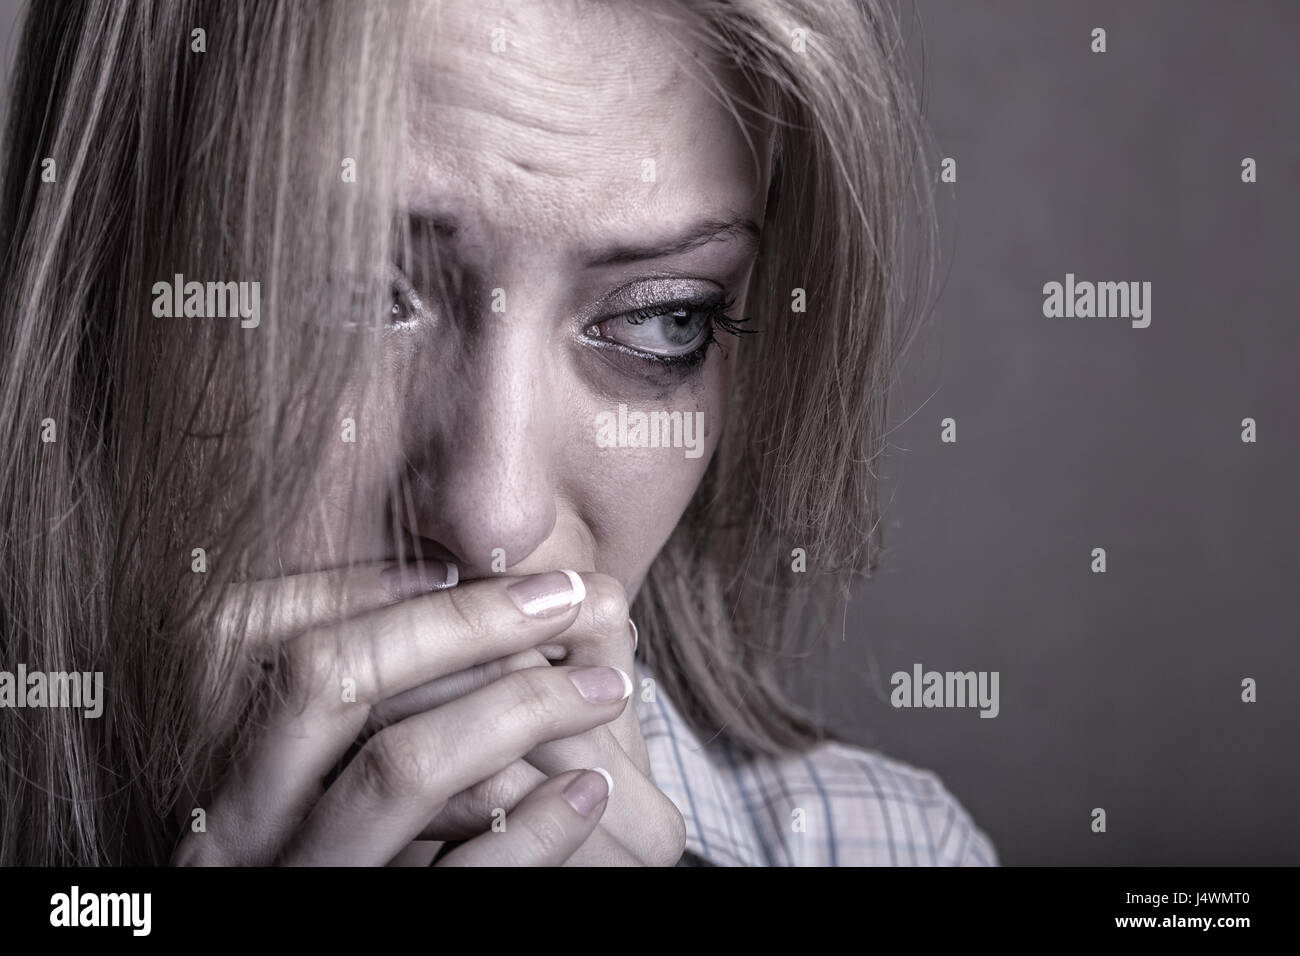 Young sad girl crying on a dark background Stock Photo